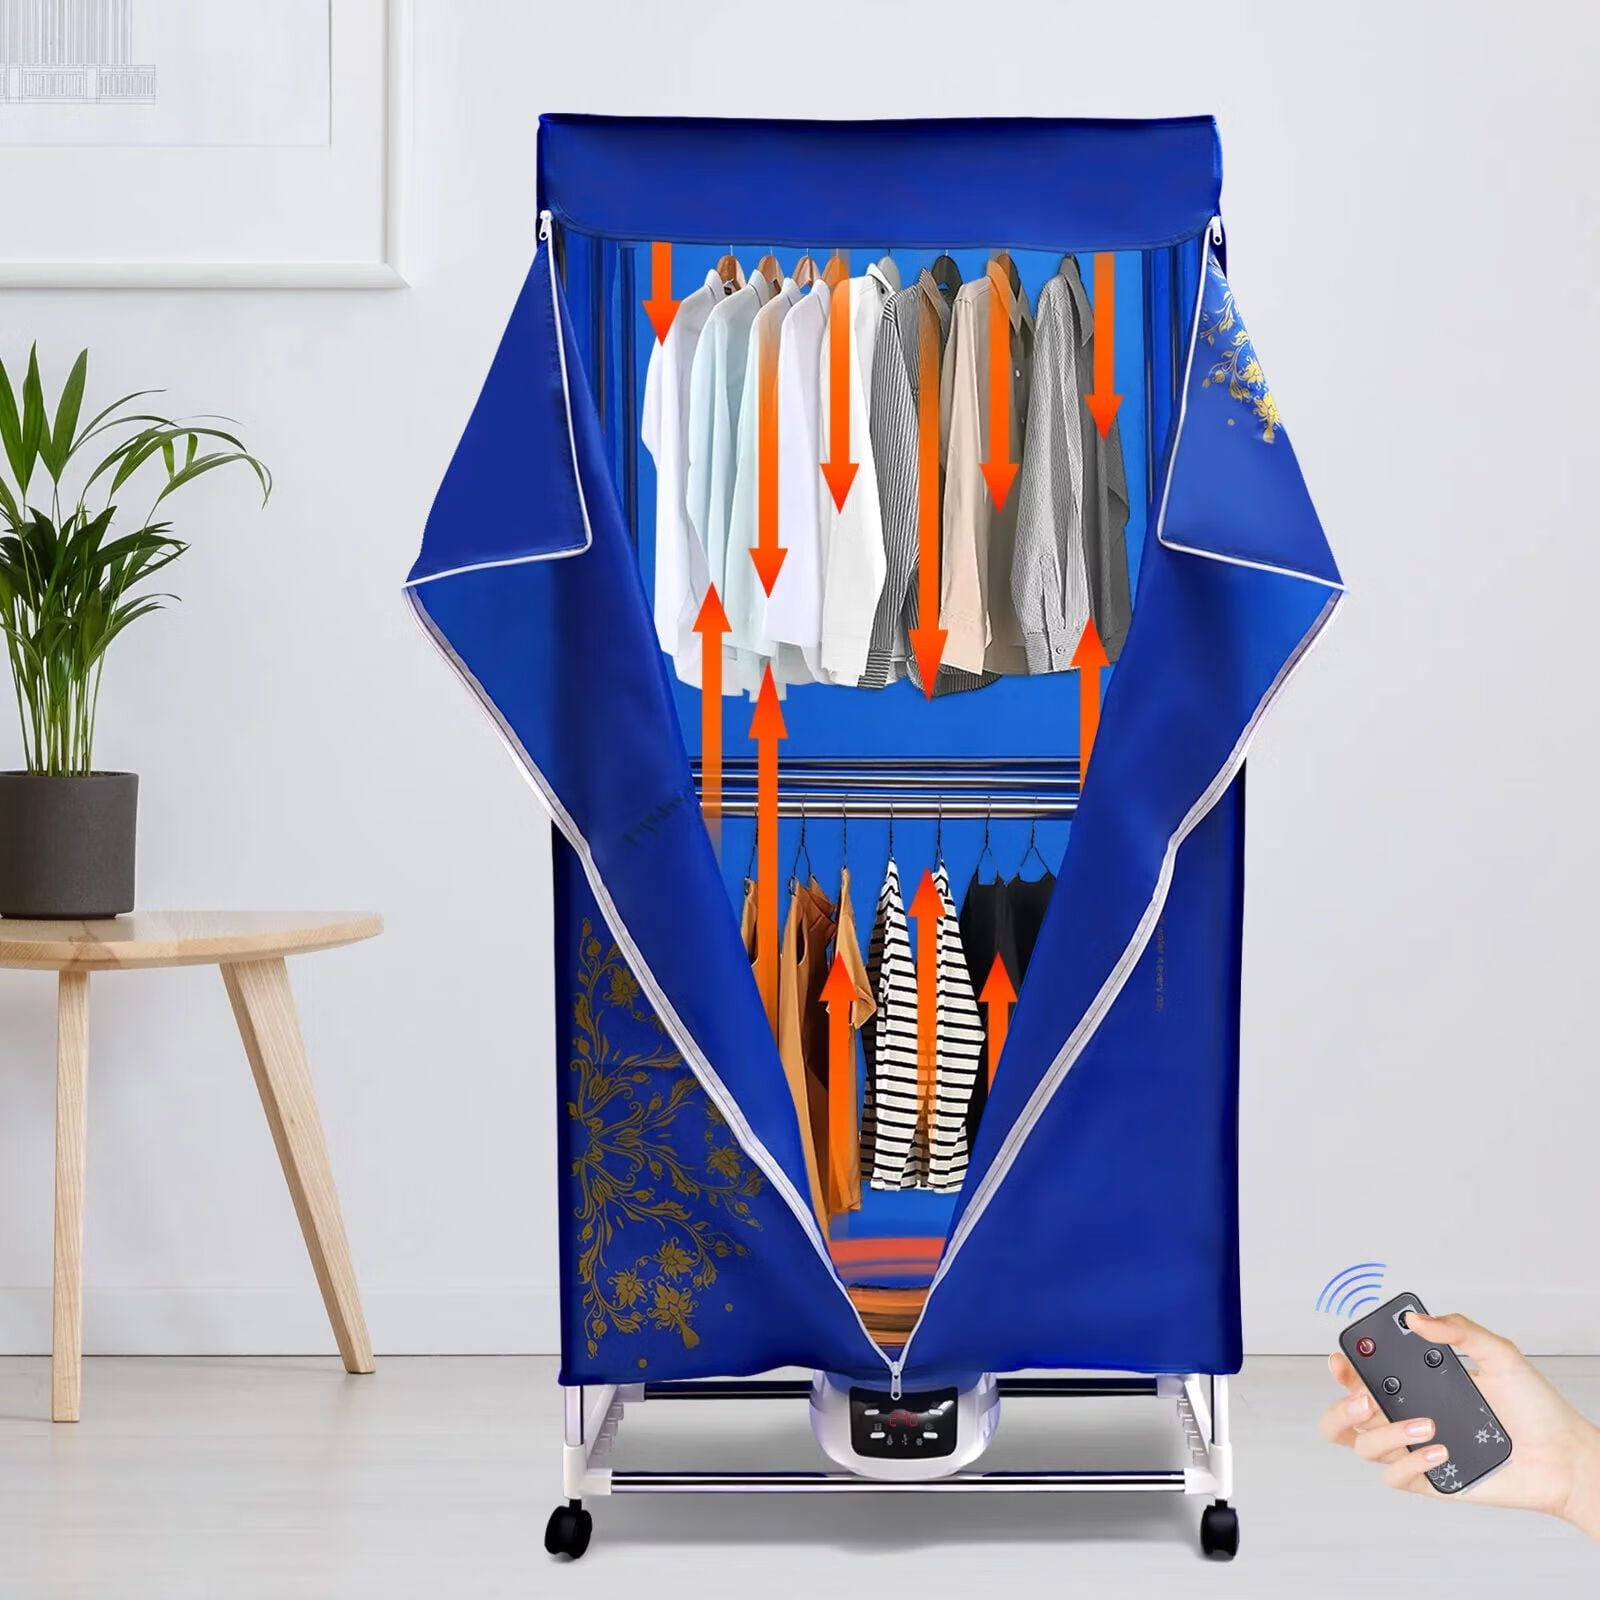 Portable Dryer, 1000W 110V Electric Clothes Drying, Electric Clothes Dryer  Rack, Timing Function, Low Noise, for Home, Apartments and Travels